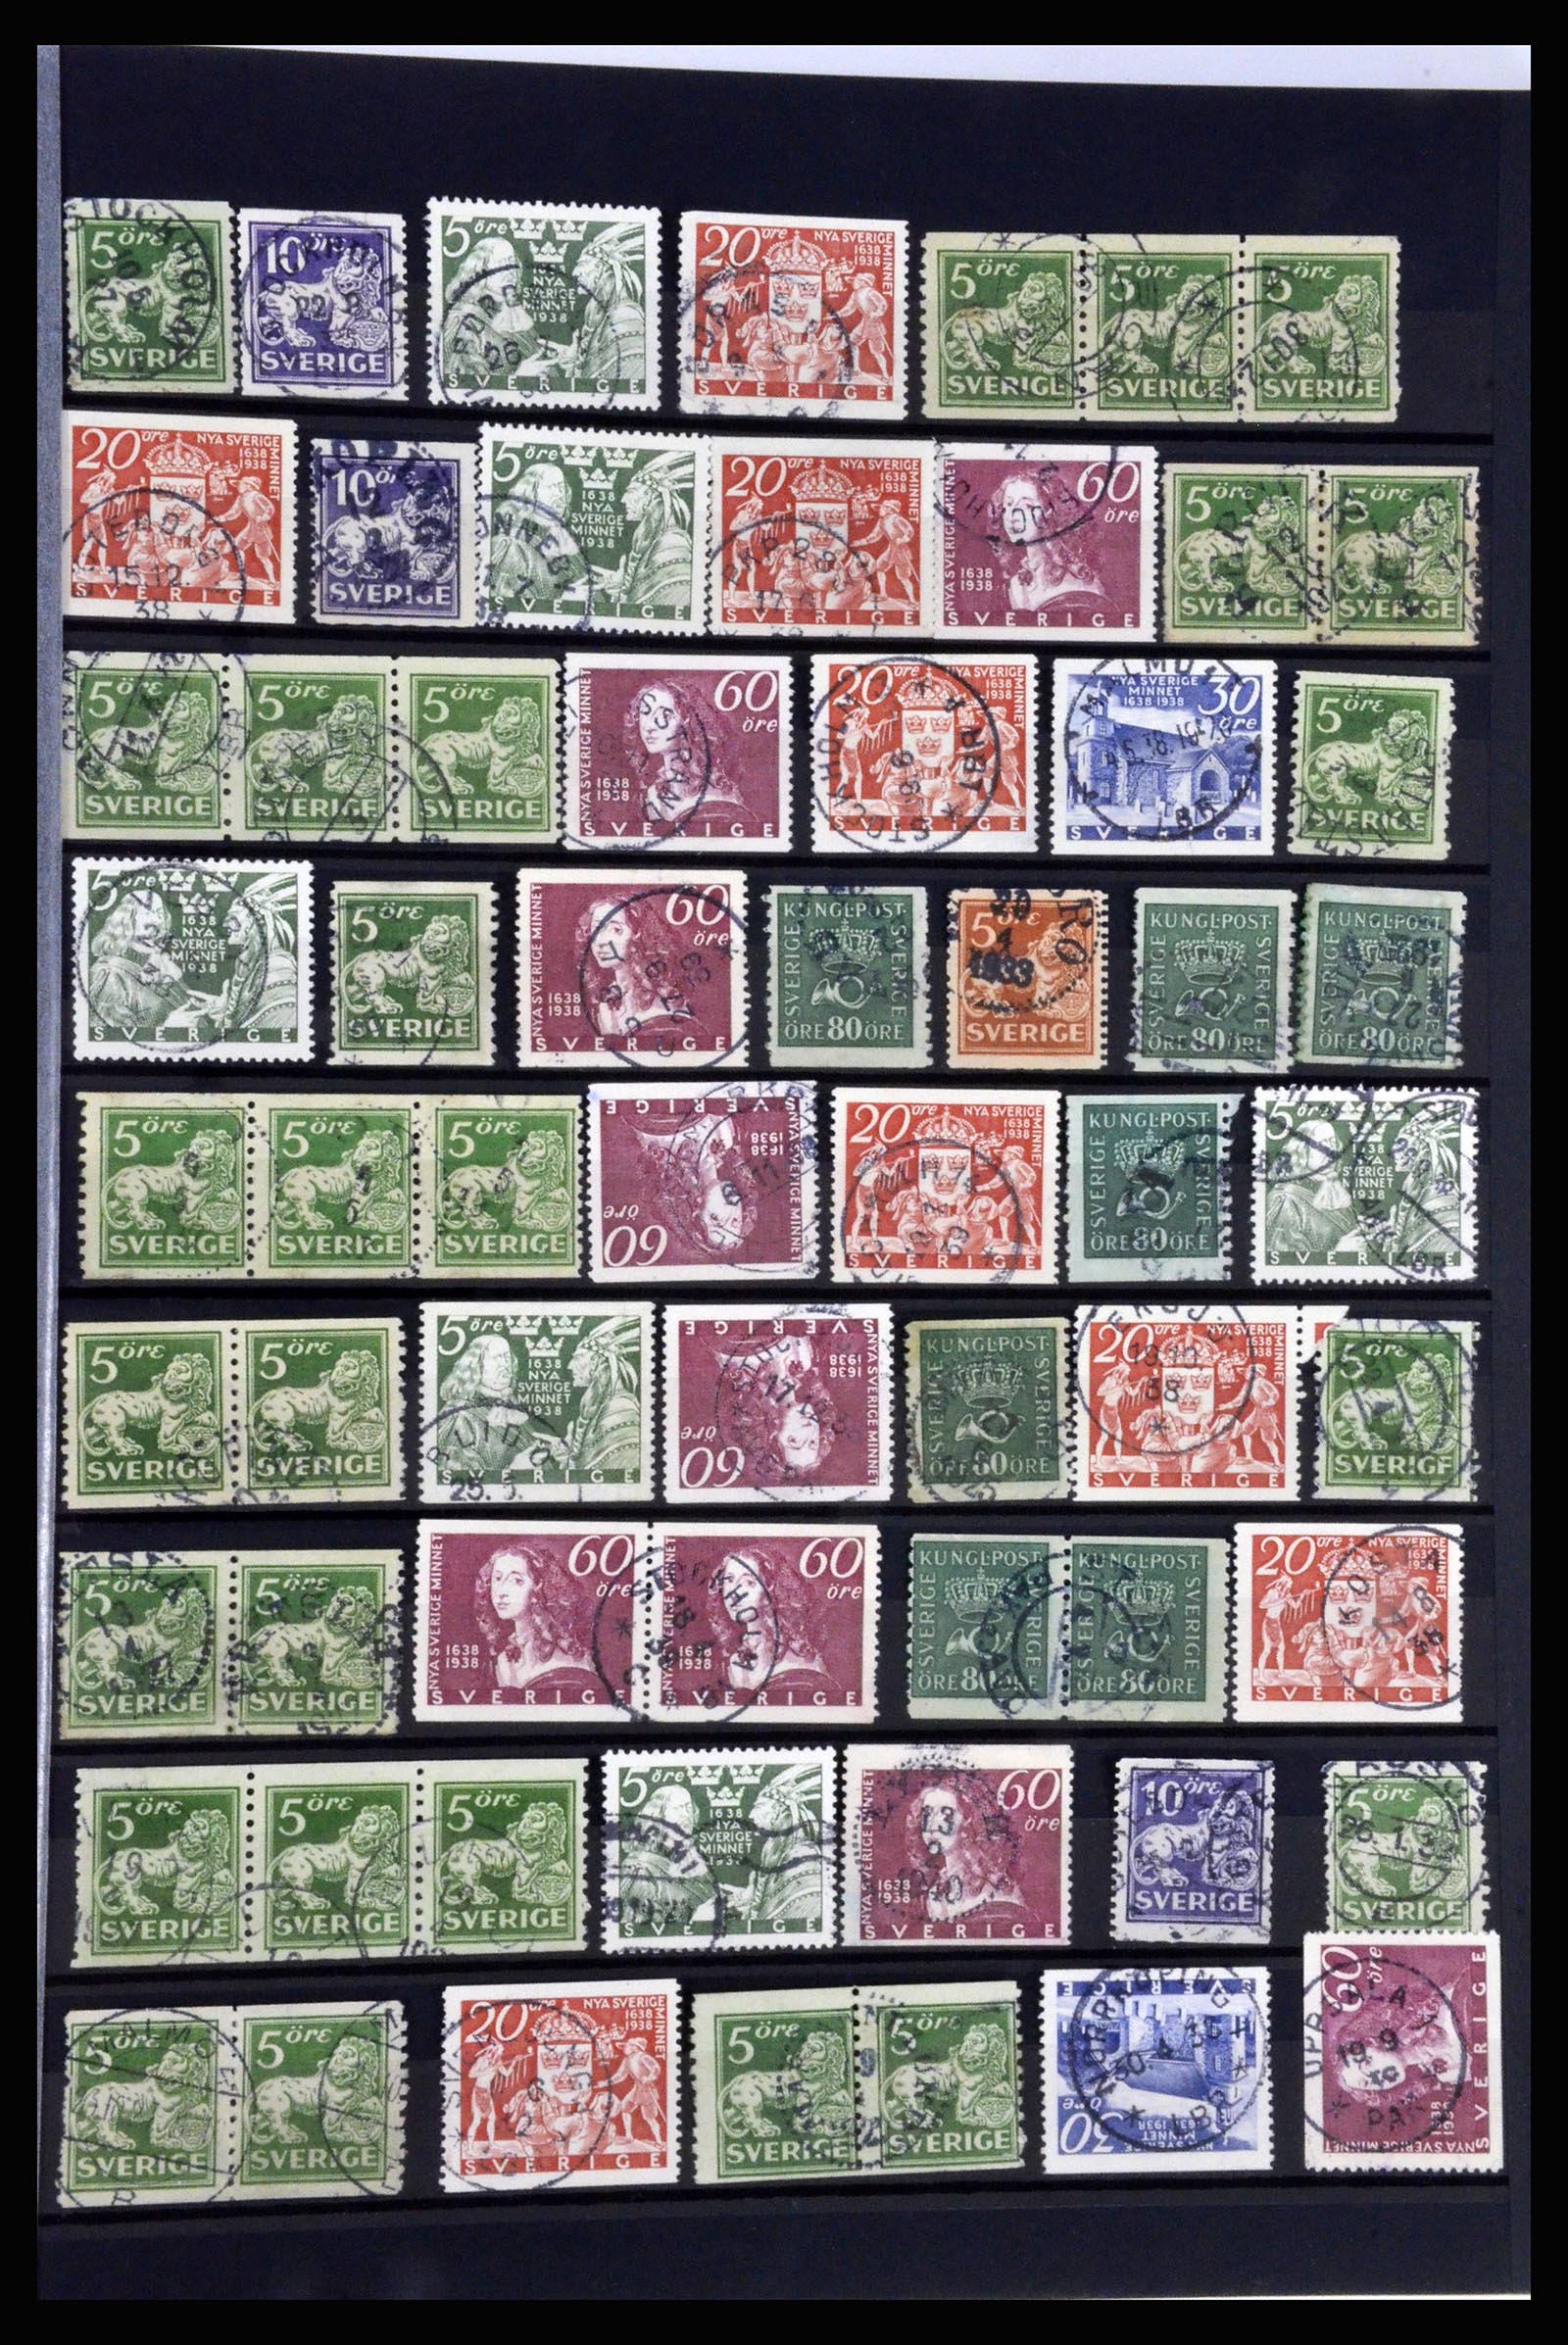 36316 037 - Stamp collection 36316 Sweden cancellations 1920-1938.